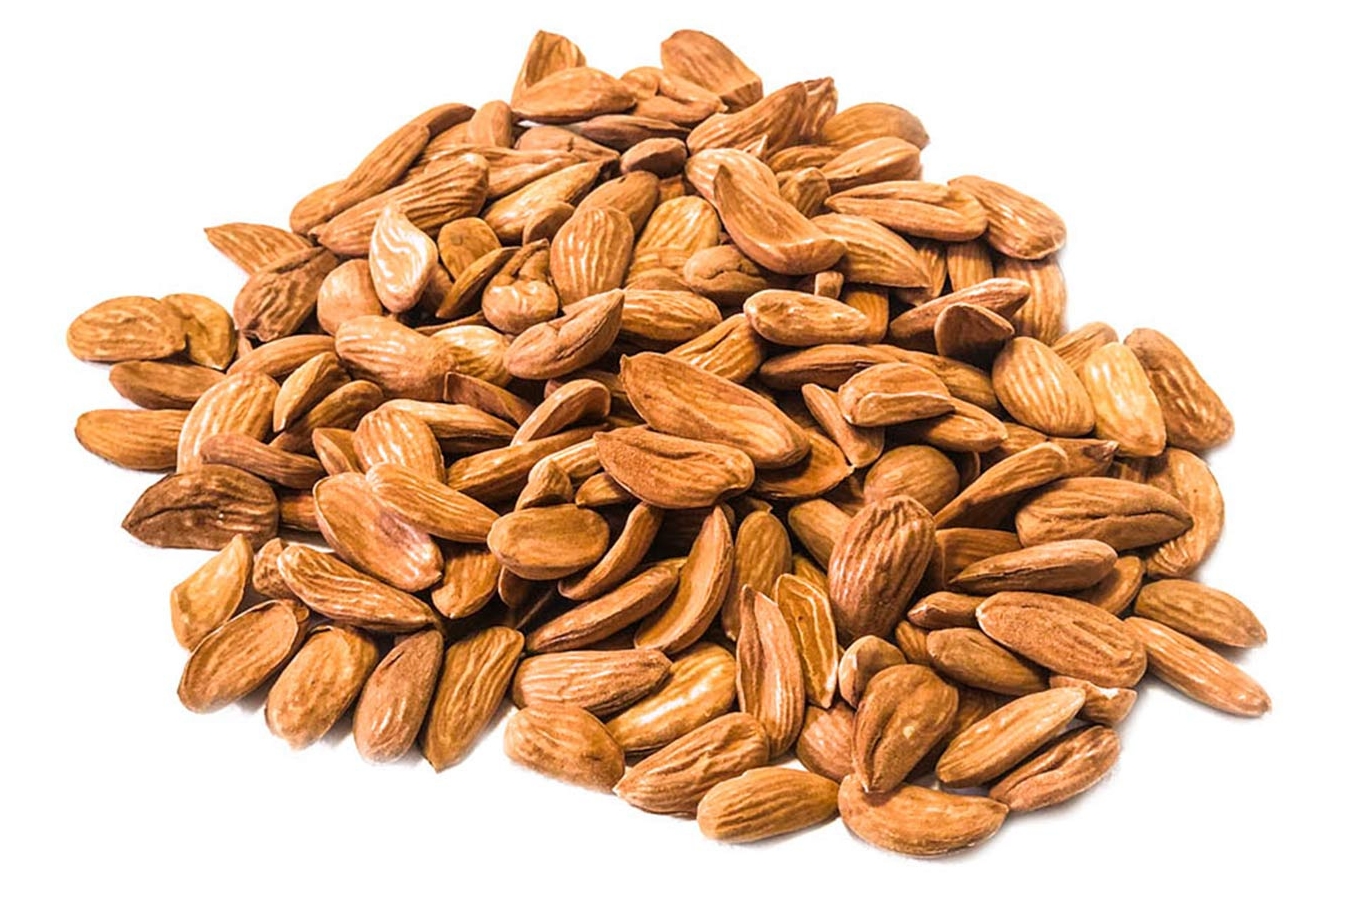 Almonds and exports